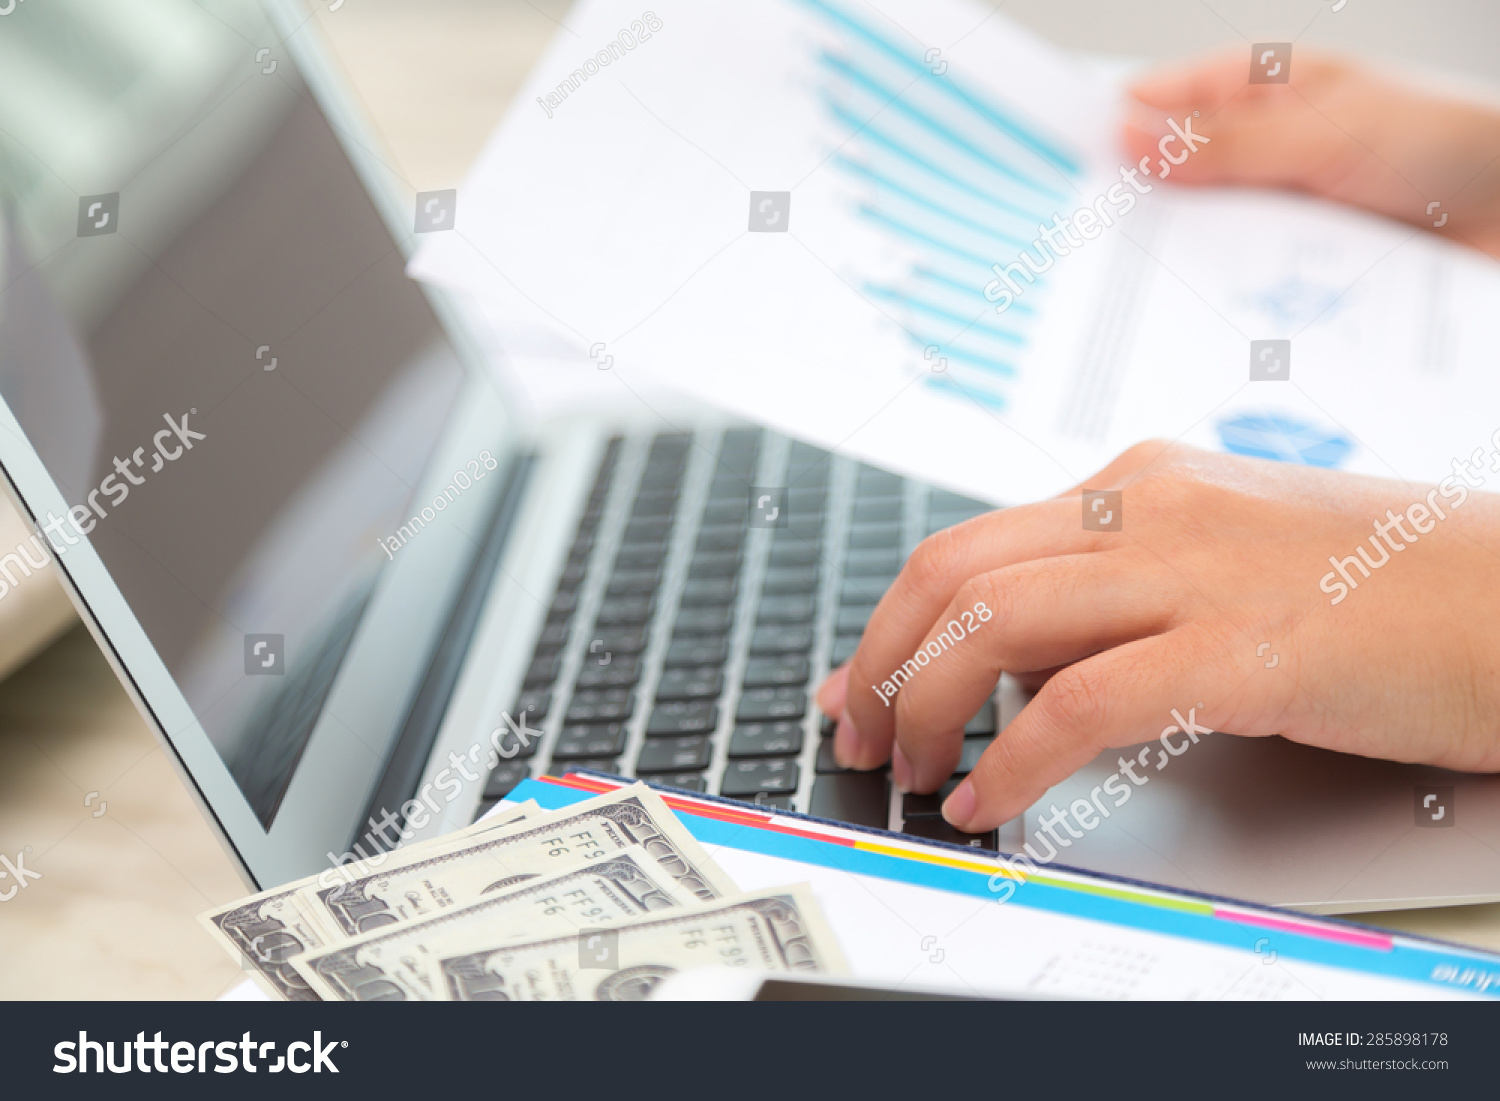 Business woman hand typing on laptop keyboard with Financial charts on the table #285898178